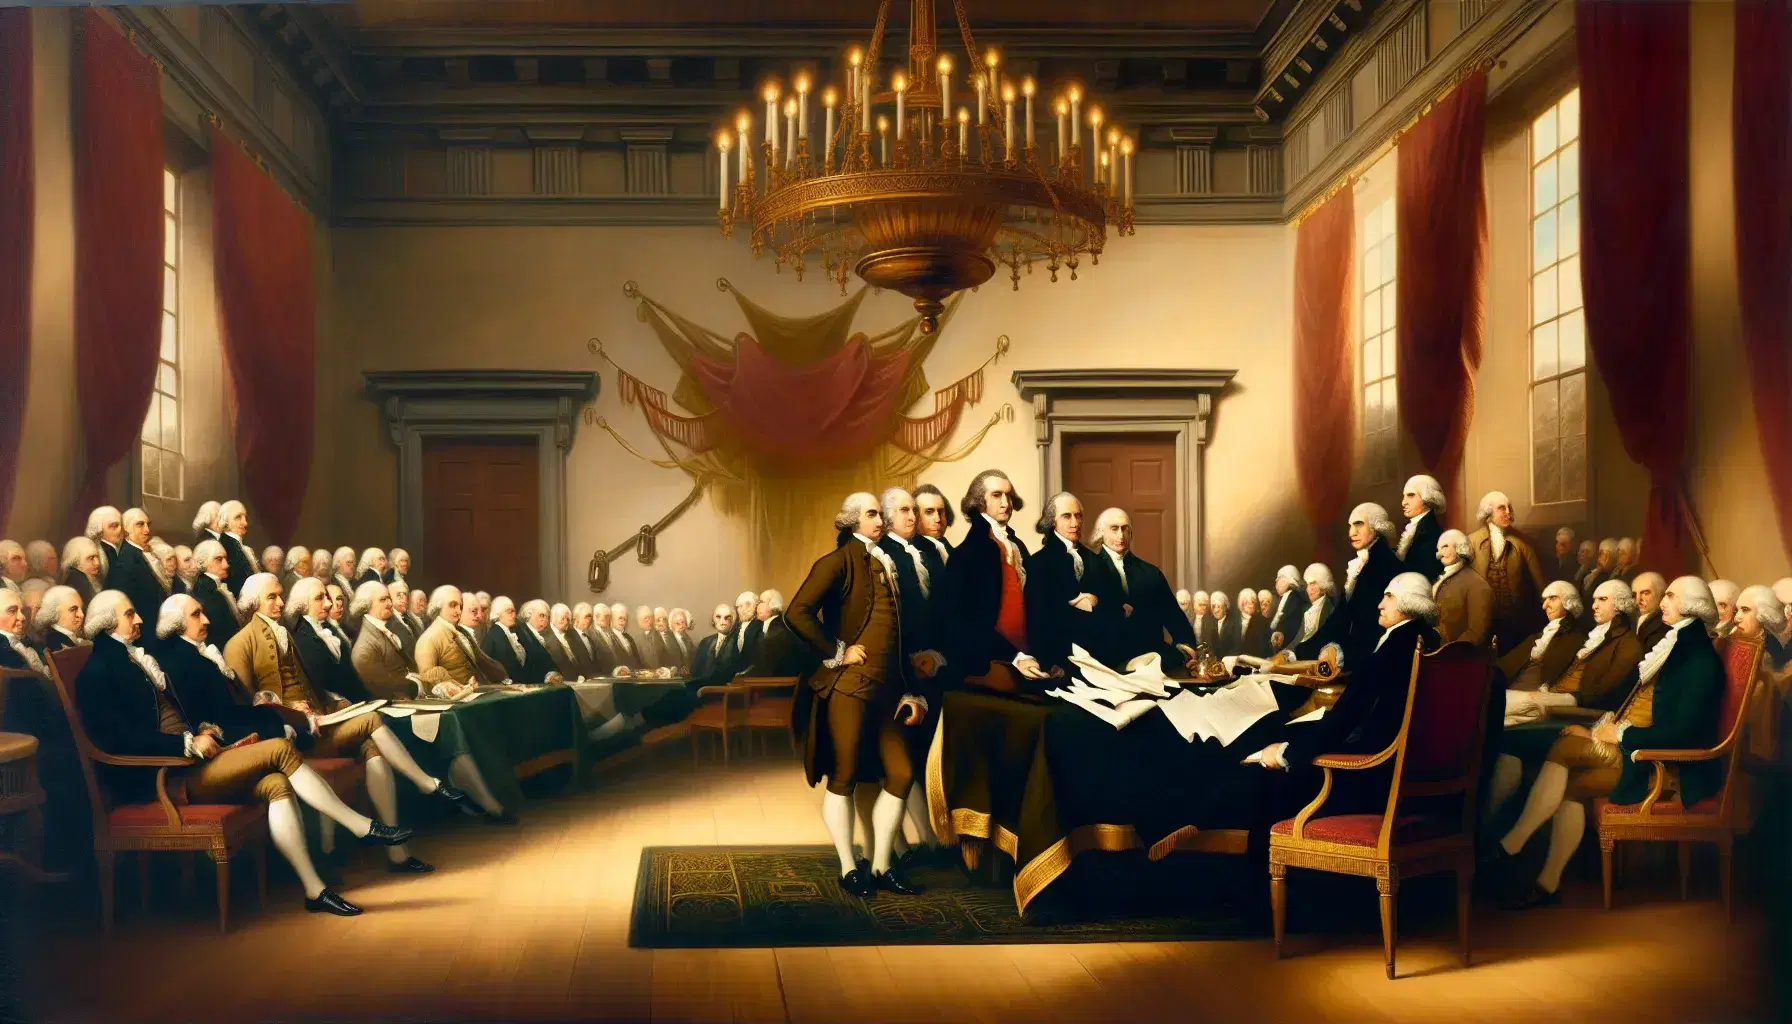 Depiction of the Constitutional Convention of 1787 with men in period dress around an oval table, engaged in legislative discussions.